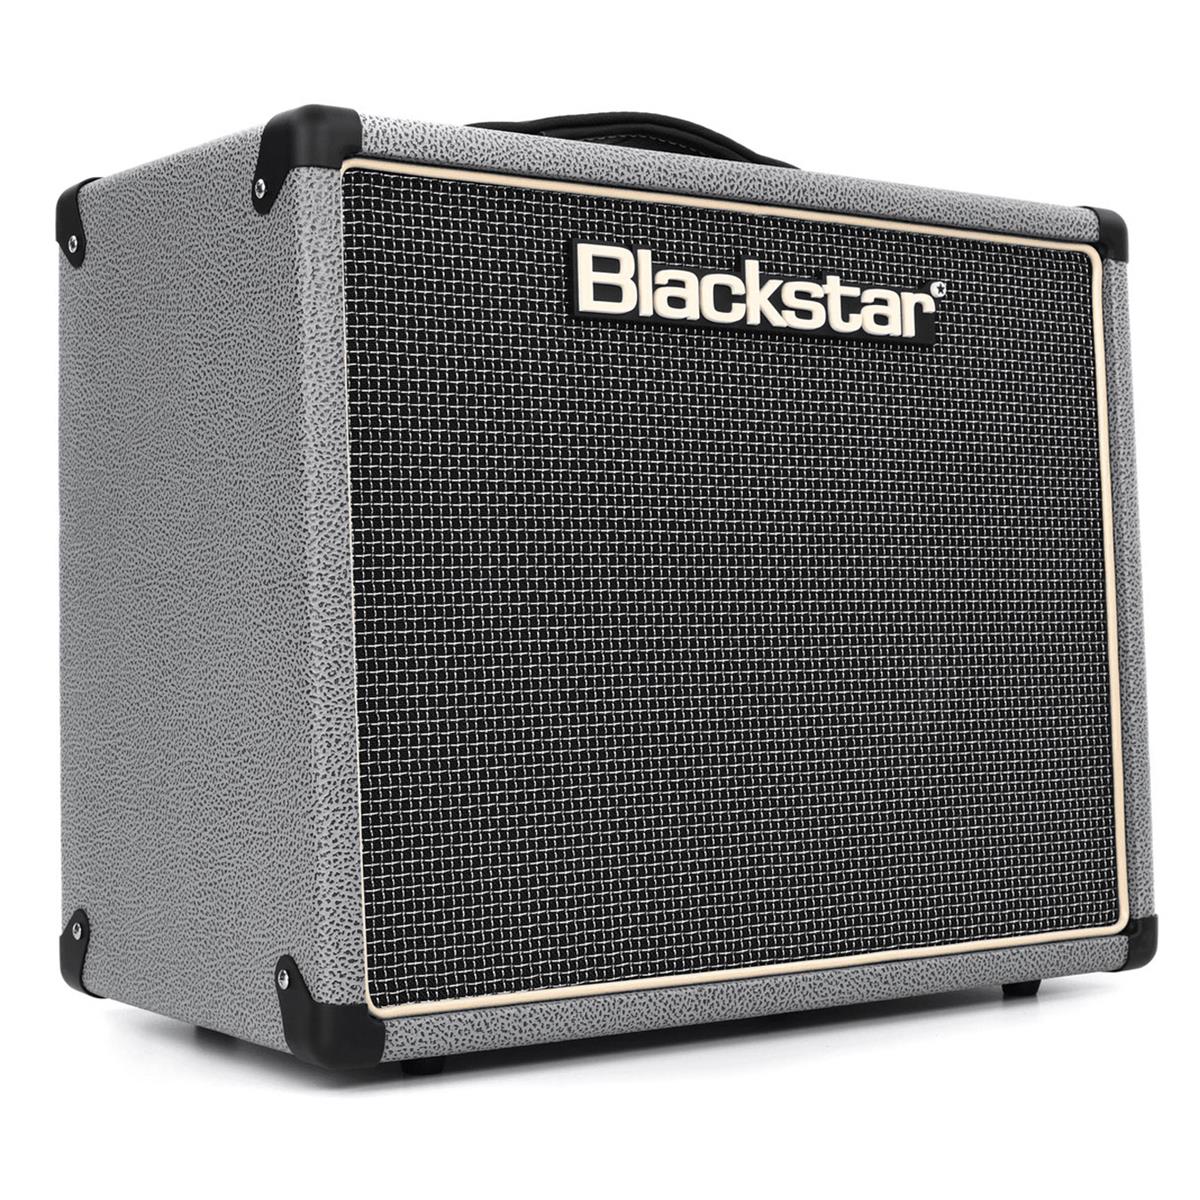 

Blackstar HT-5R MKII 5W 1x12" Valve Combo Amplifier with Reverb, Bronco Gray